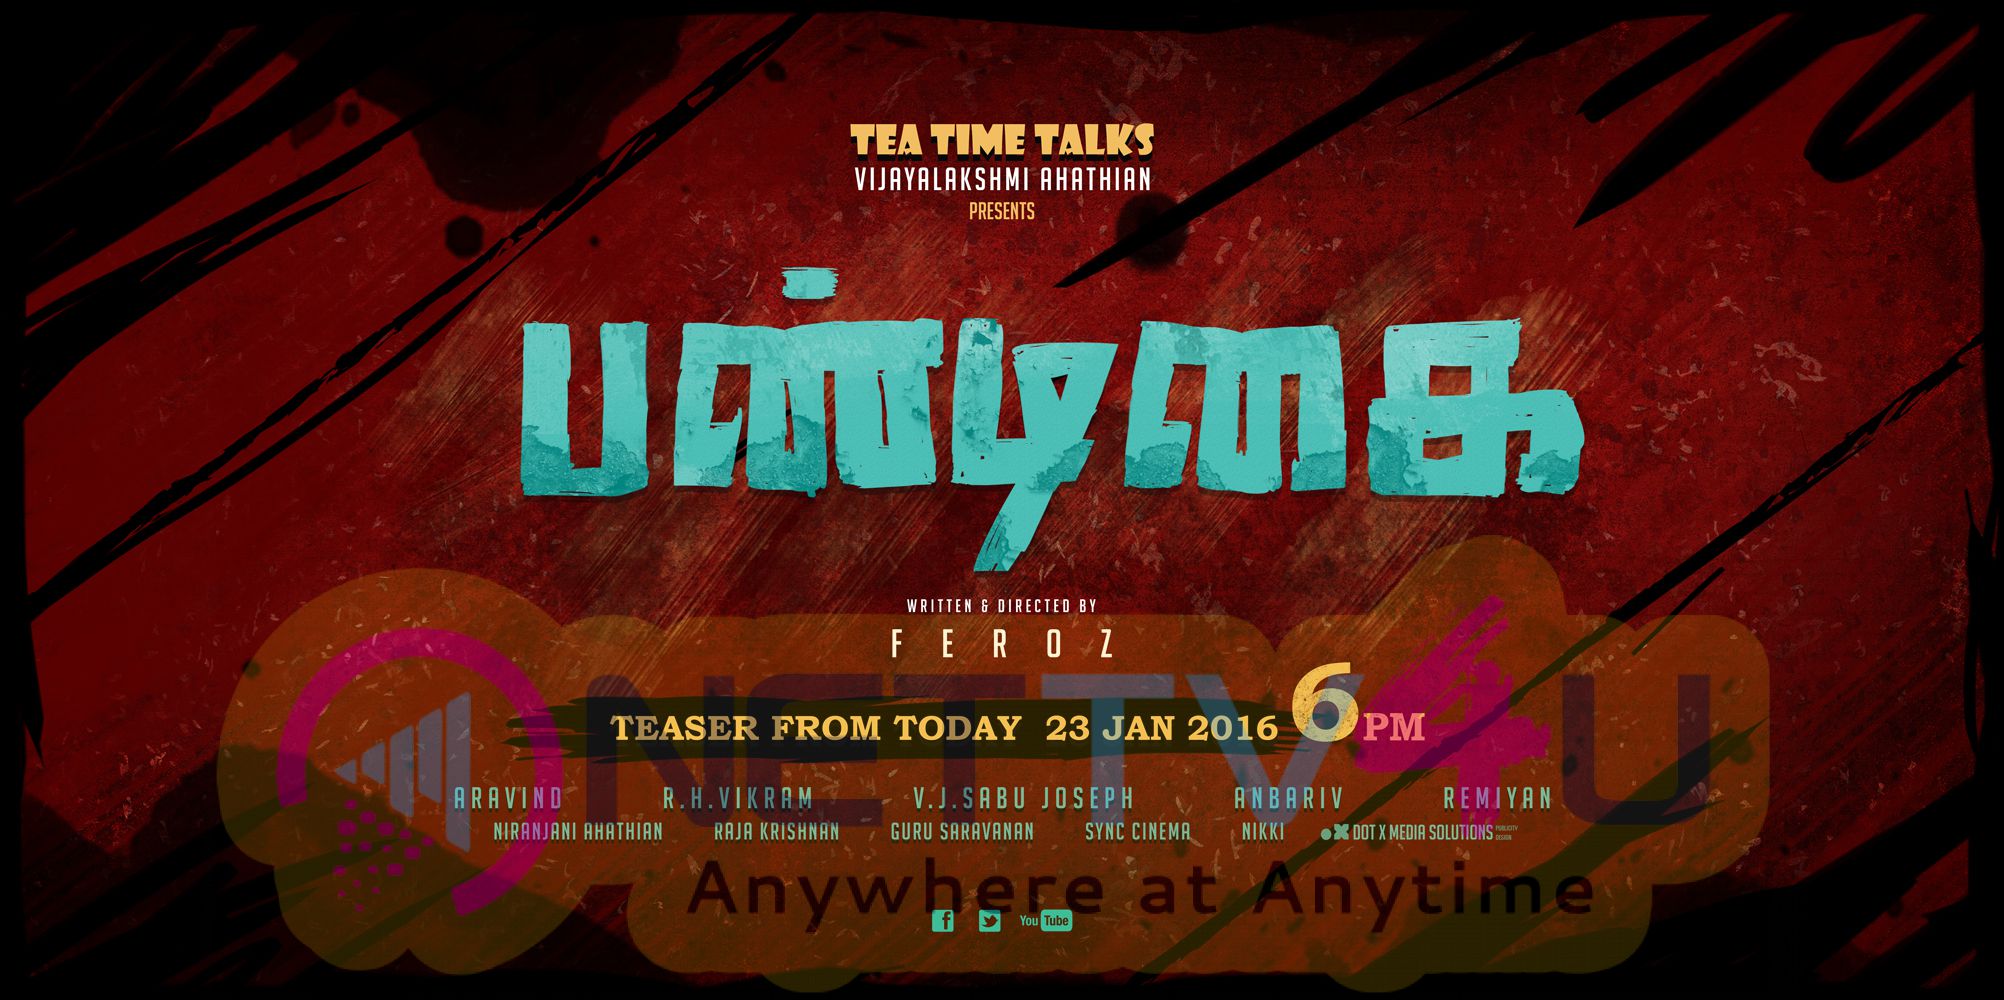 tamil movie pandigai teaser from today poster 1